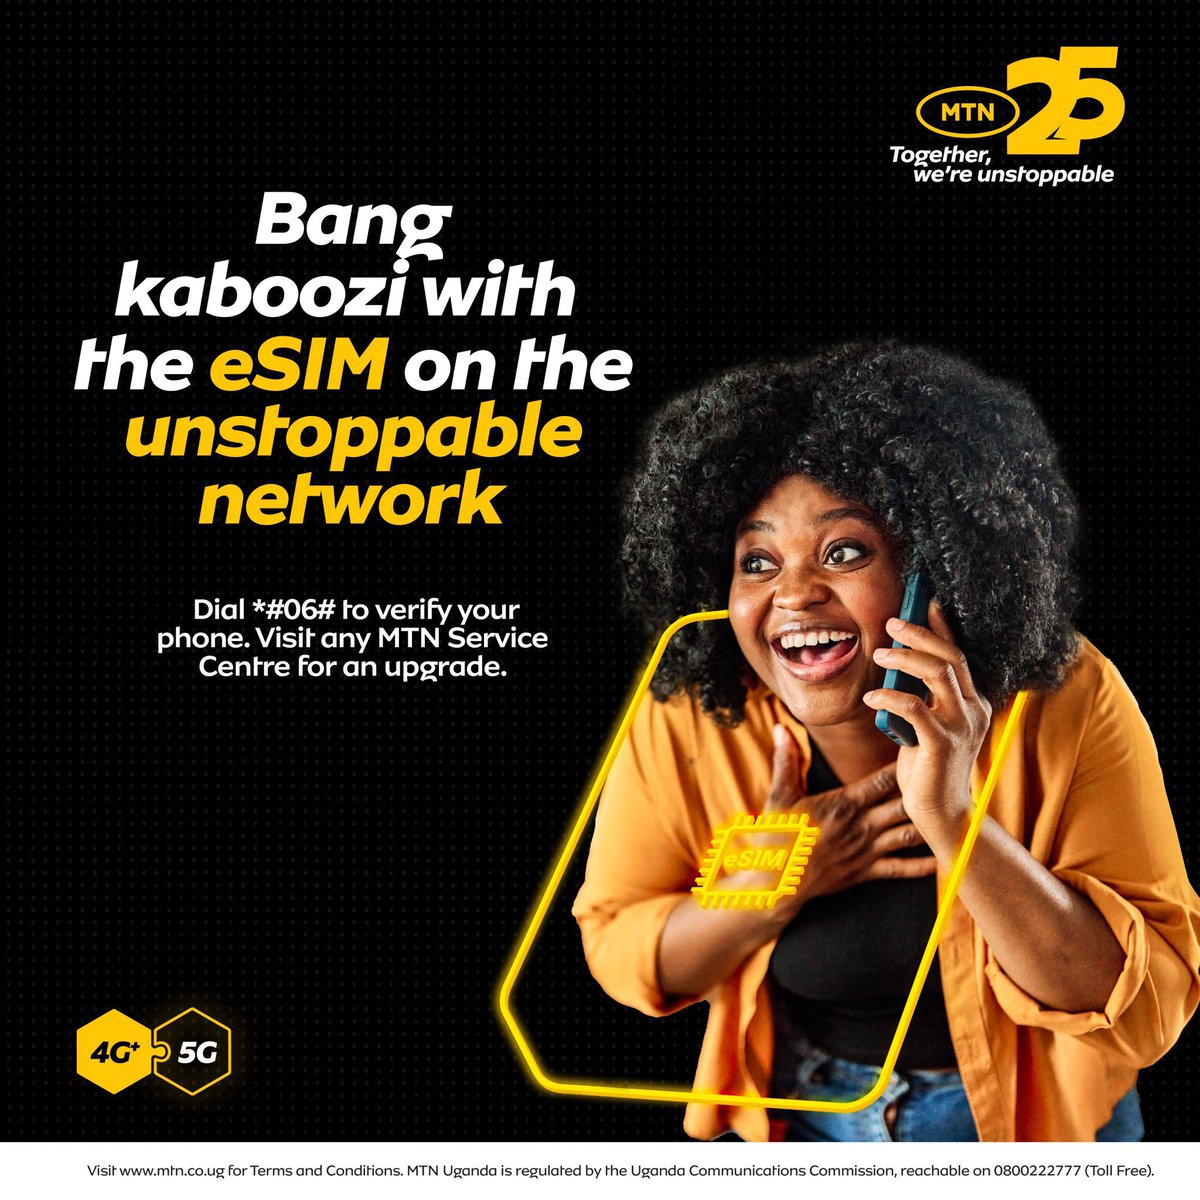 Kaboozi using #MTNeSIM on the #UnstoppableNetwork is what we all need. 
To find out if your device supports the service, dial *#06# to verify or visit a nearby MTN Service Centre for an upgrade or assistance. #TogetherWeAreUnstoppable